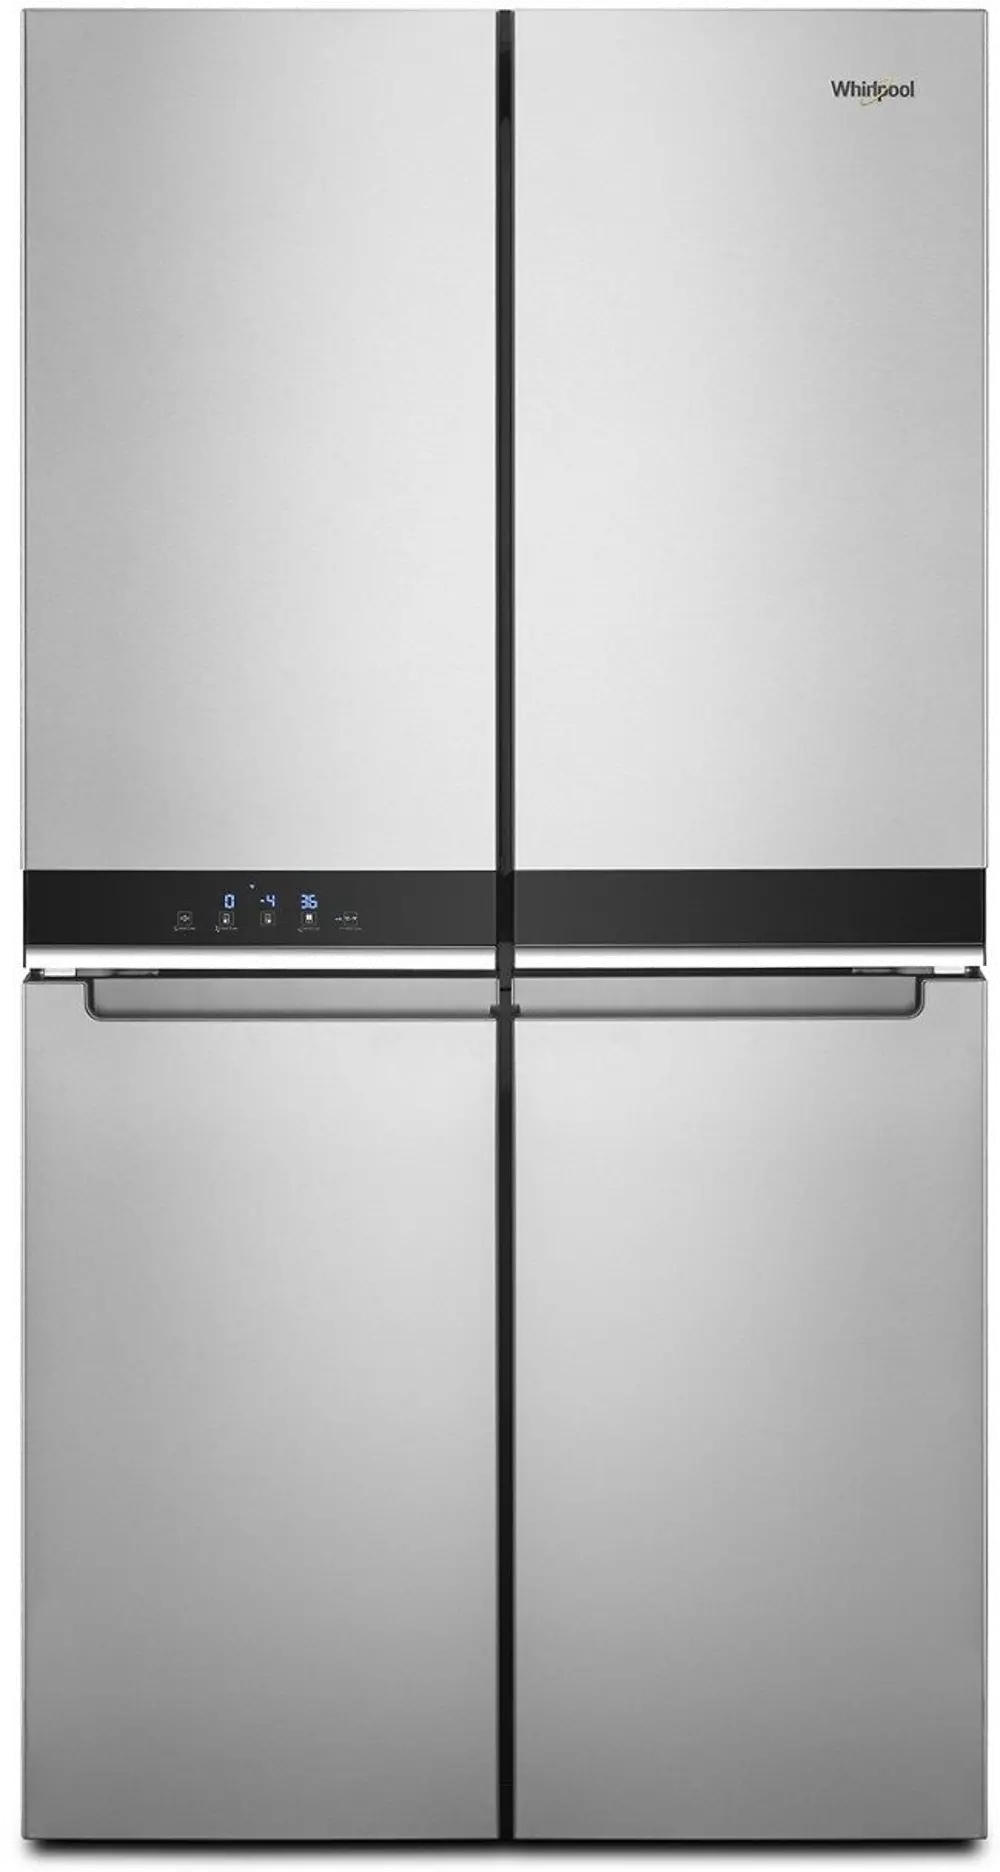 WRQA59CNKZ Whirlpool 19 cu ft French Door Refrigerator - Counter Depth Stainless Steel-1